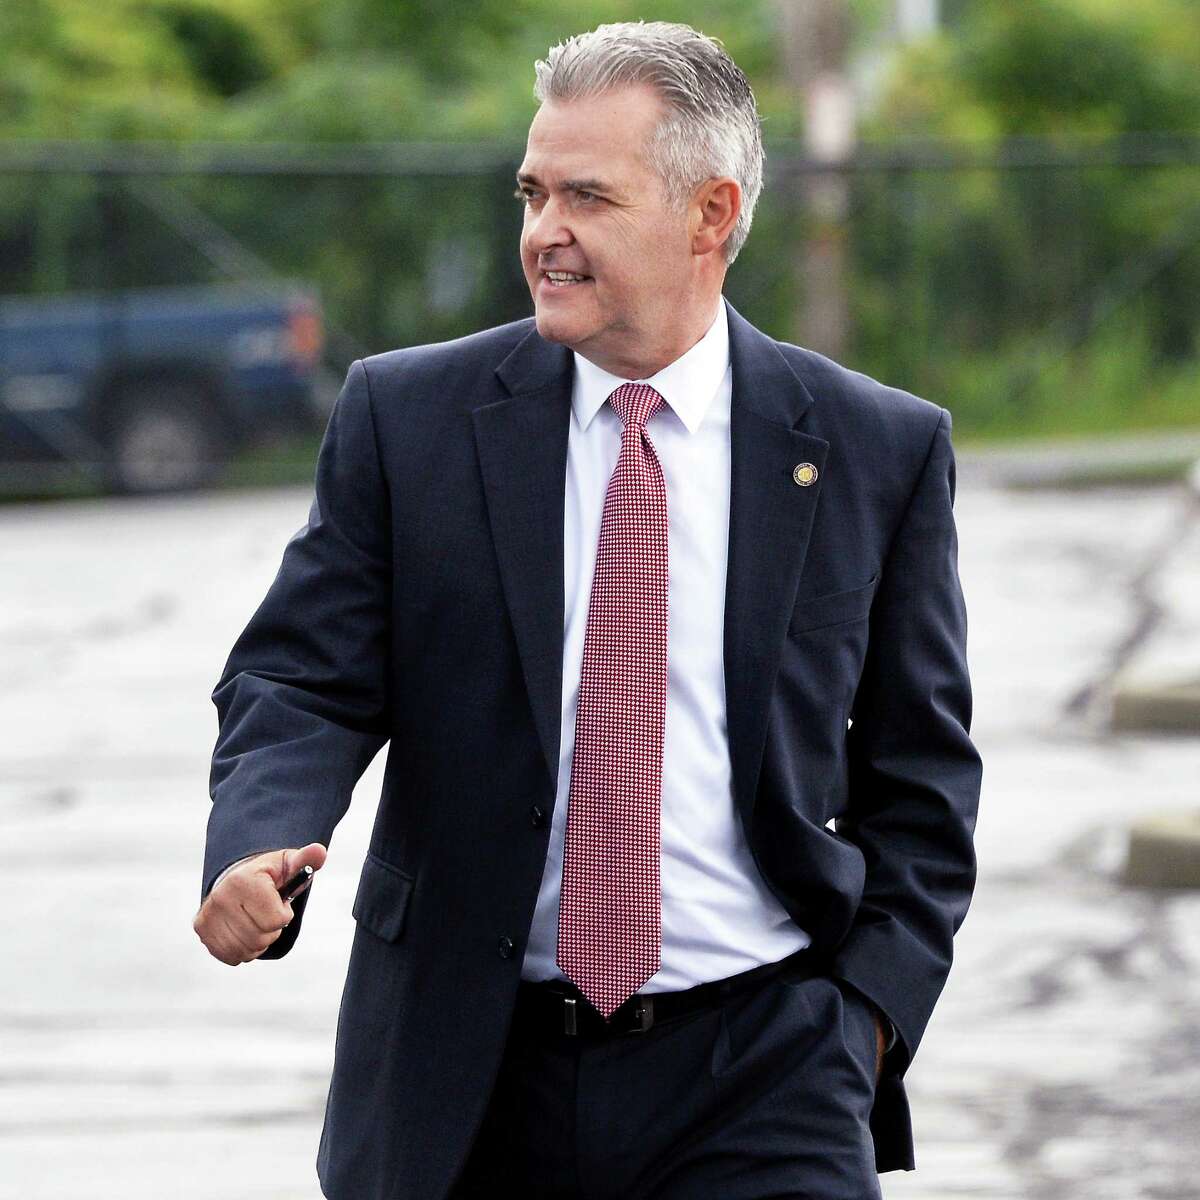 Rensselaer County Executive Candidate Steven McLaughlin arrives for a debate with his Republican primary opponent Chris Meyer Thursday Sept. 7, 2017 in Albany, NY. (John Carl D'Annibale / Times Union)